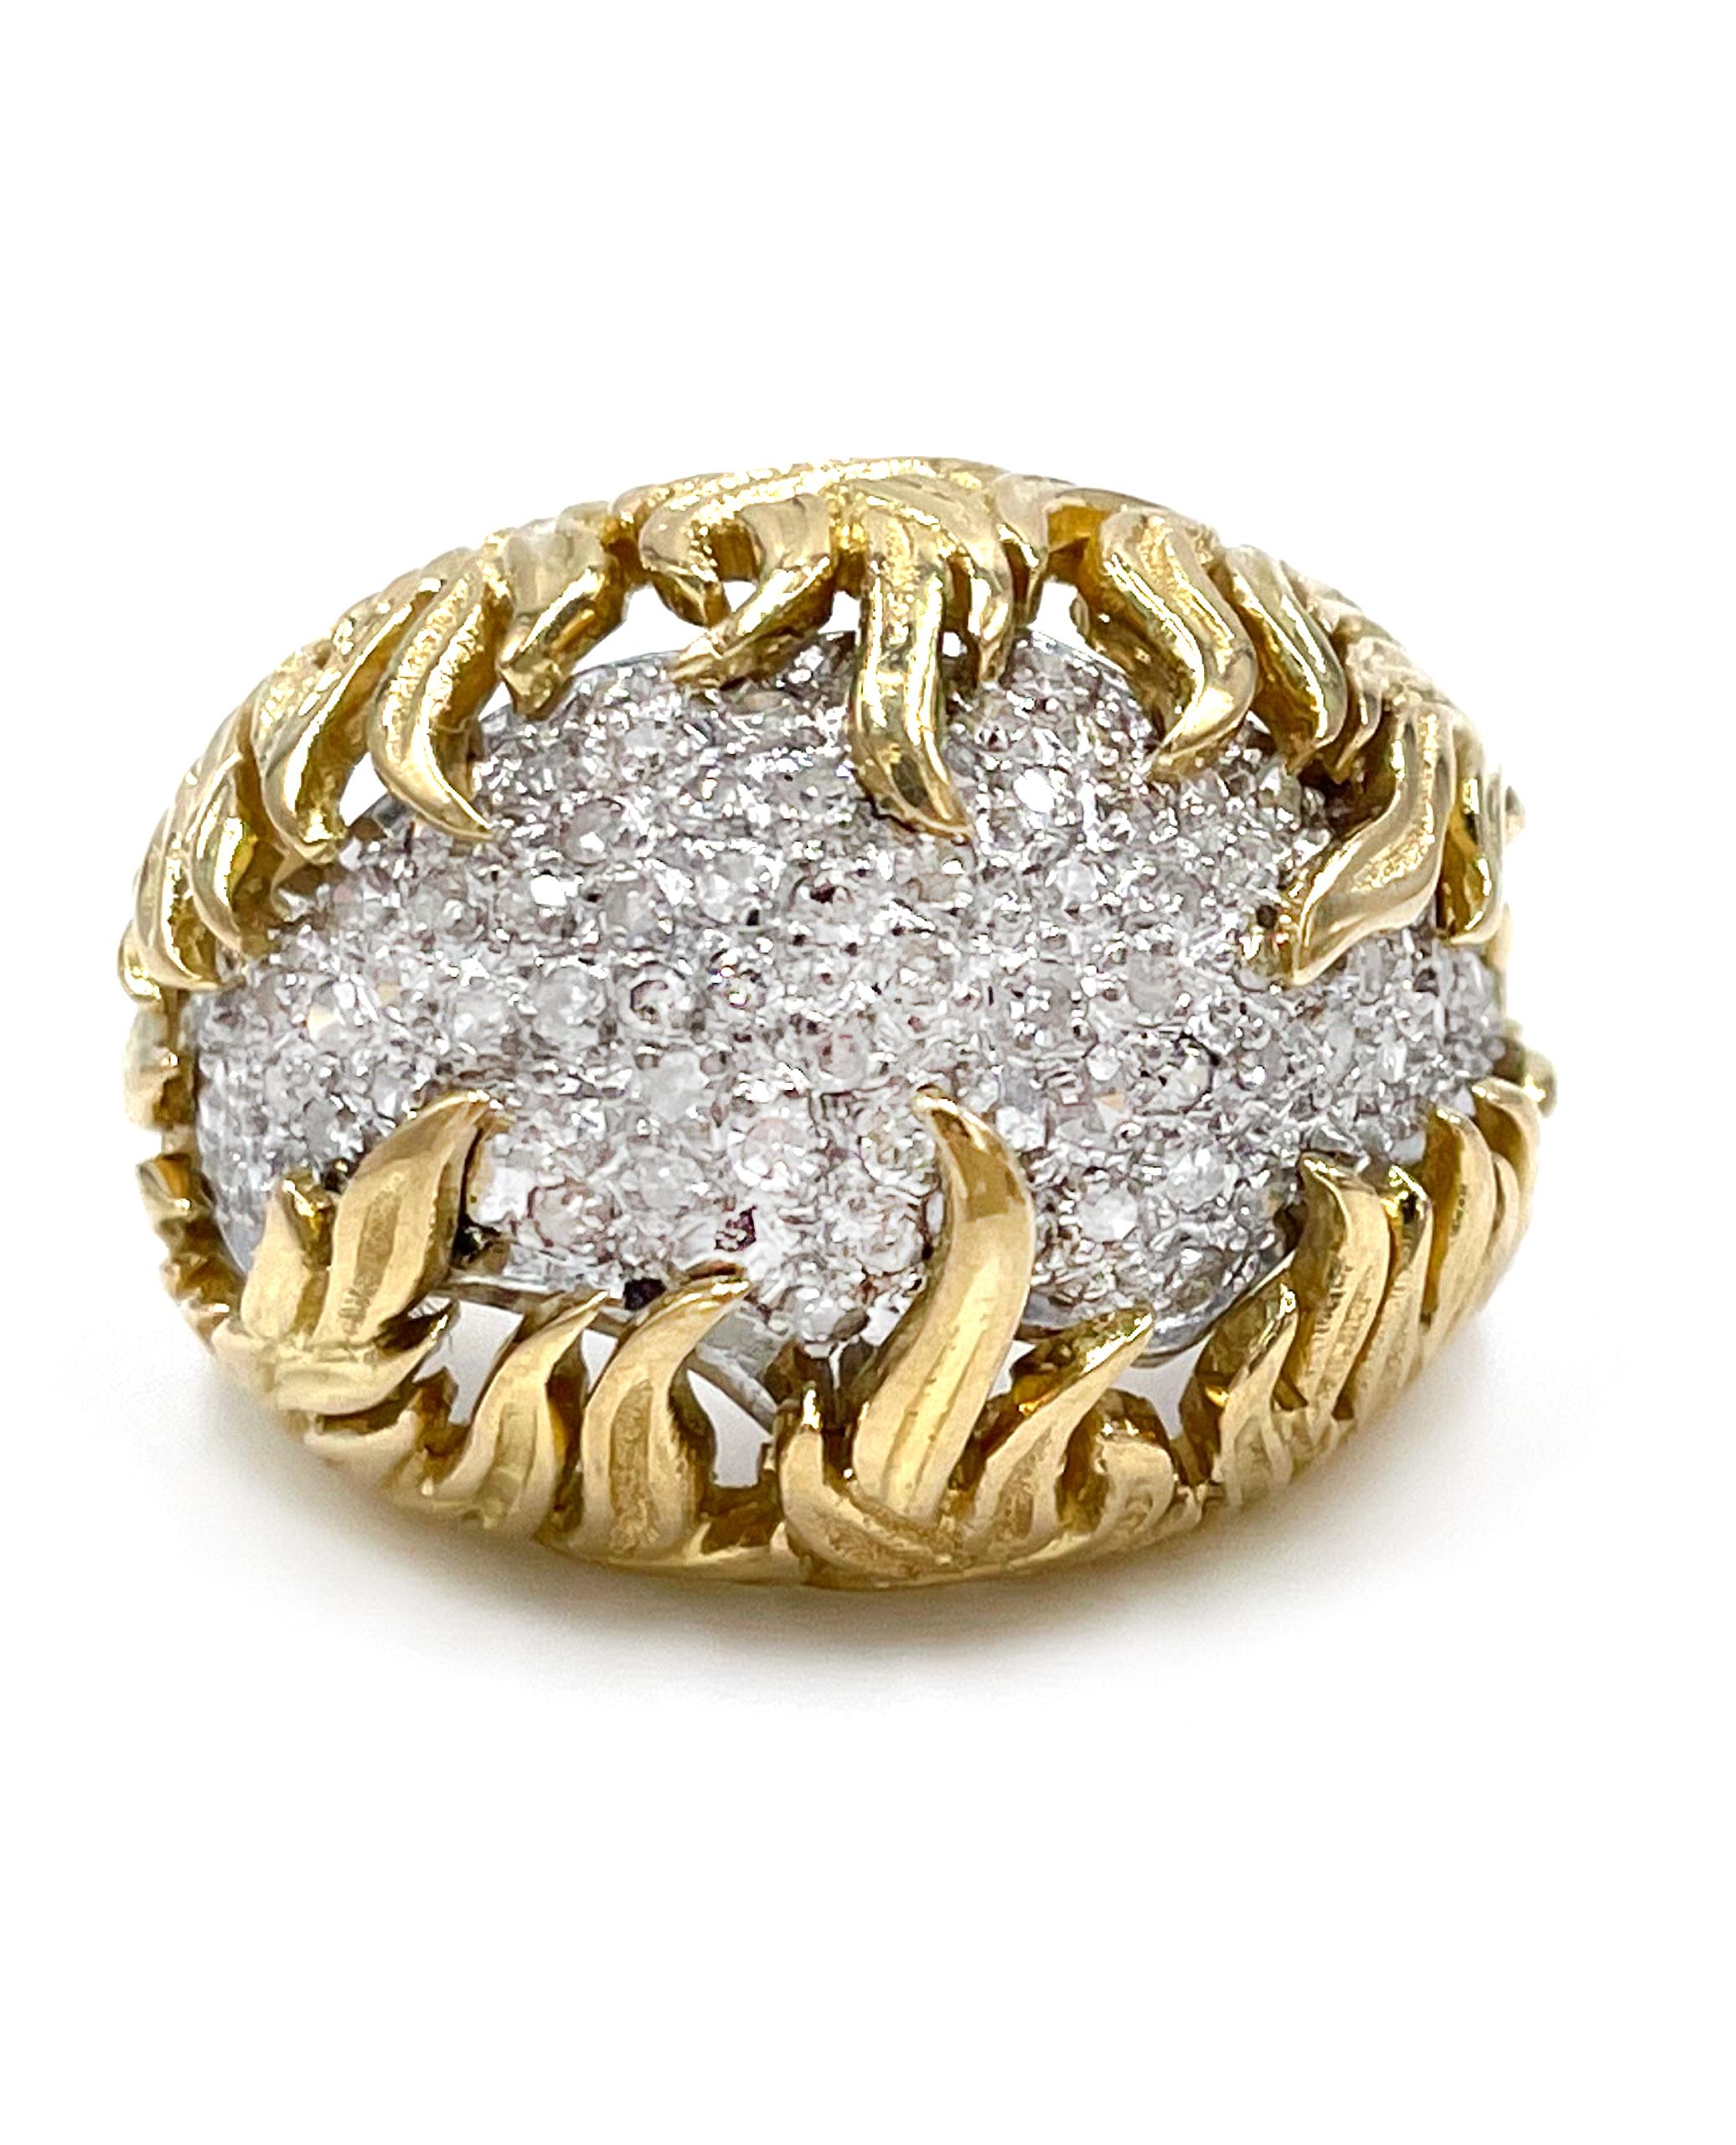 Preowned 18K yellow gold and platinum diamond dome ring The yellow gold body is inset with a platinum
plate, pave set with 68 round single cut diamonds with an approximate total weight of 0.68 carats.

* The diamonds average I color, SI2 clarity.
*